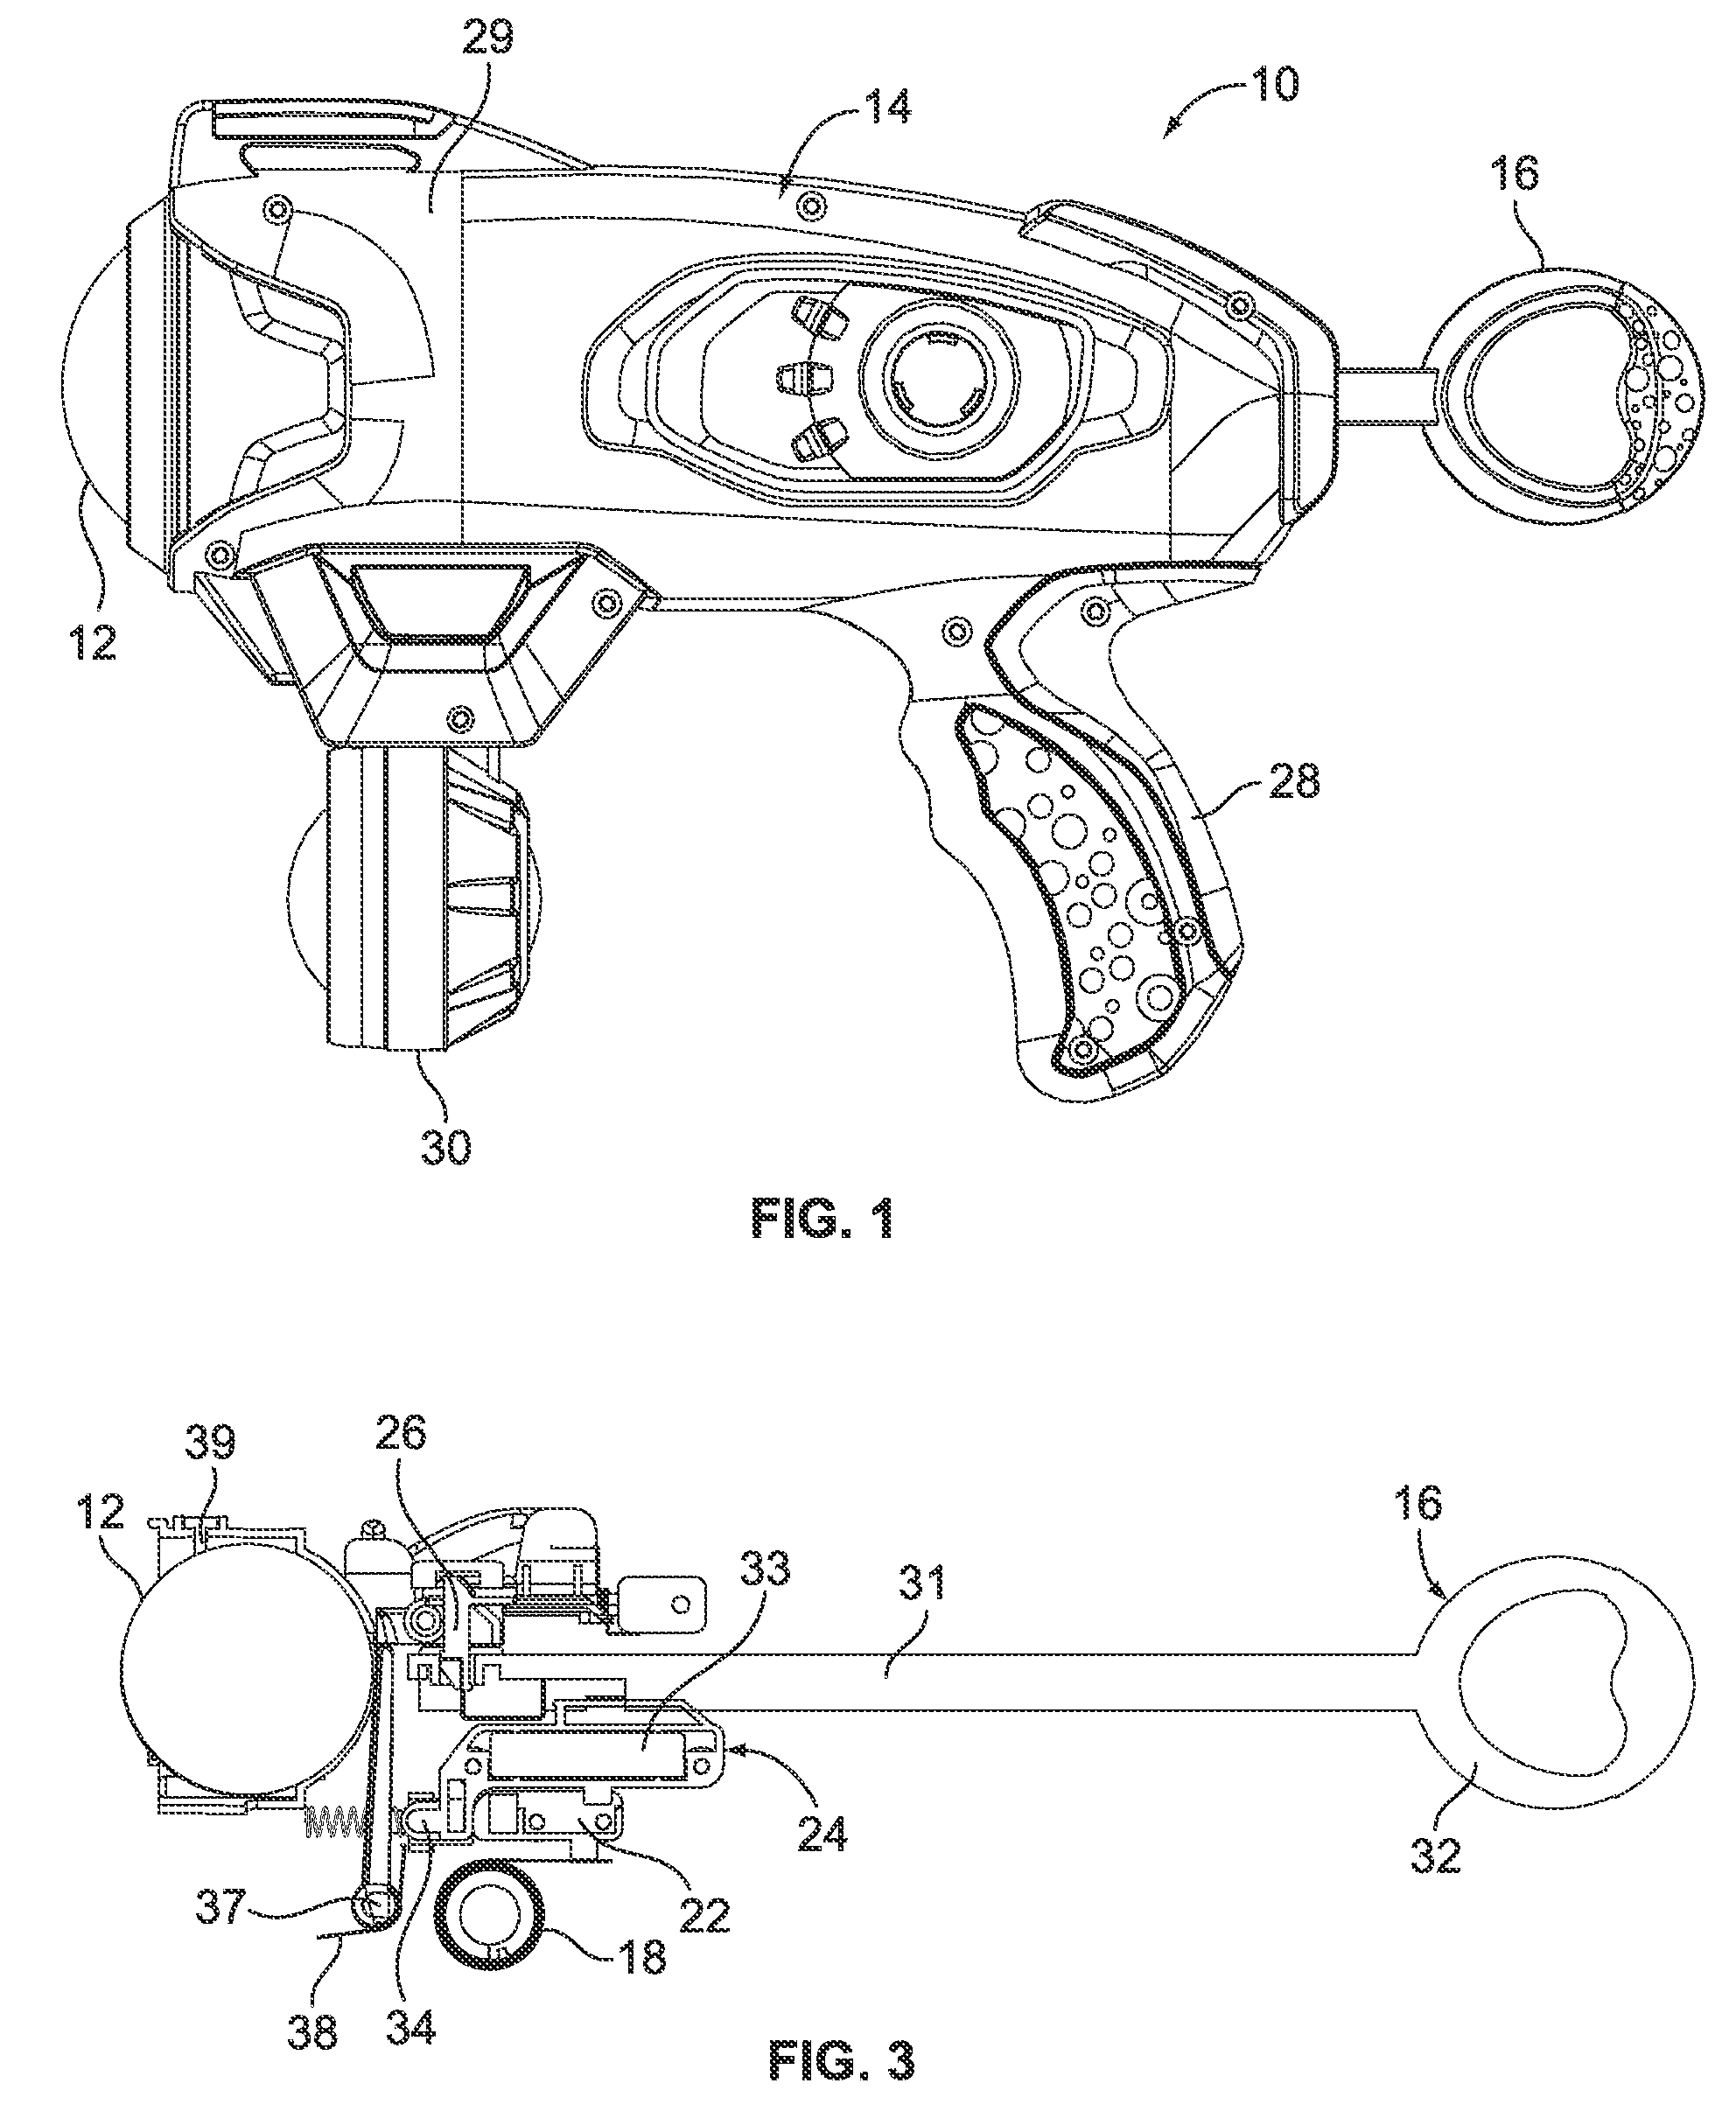 Toy projectile launcher apparatus